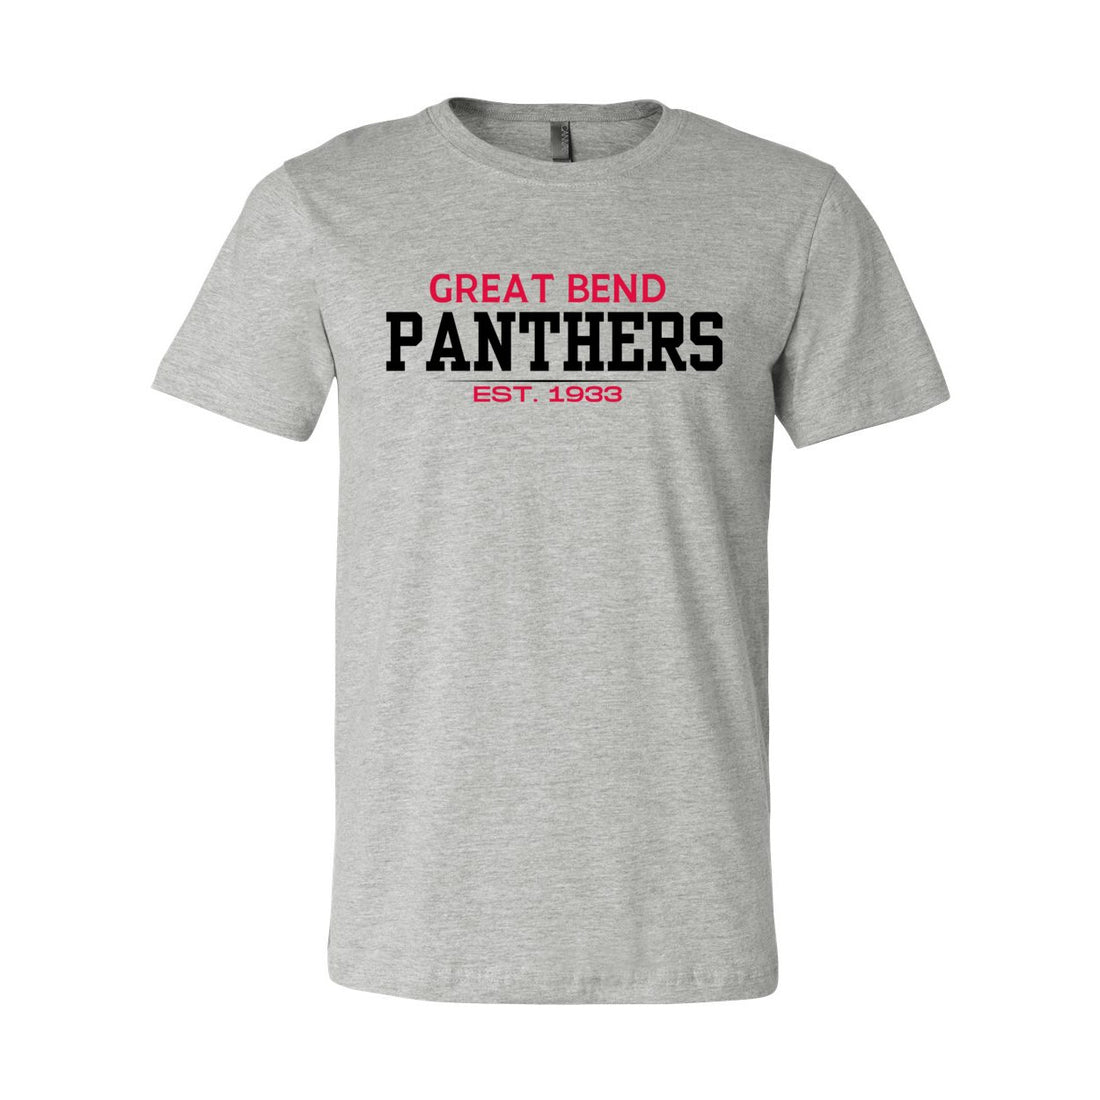 GB Panthers Est. Short Sleeve Jersey Tee - T - Shirts - Positively Sassy - GB Panthers Est. Short Sleeve Jersey Tee